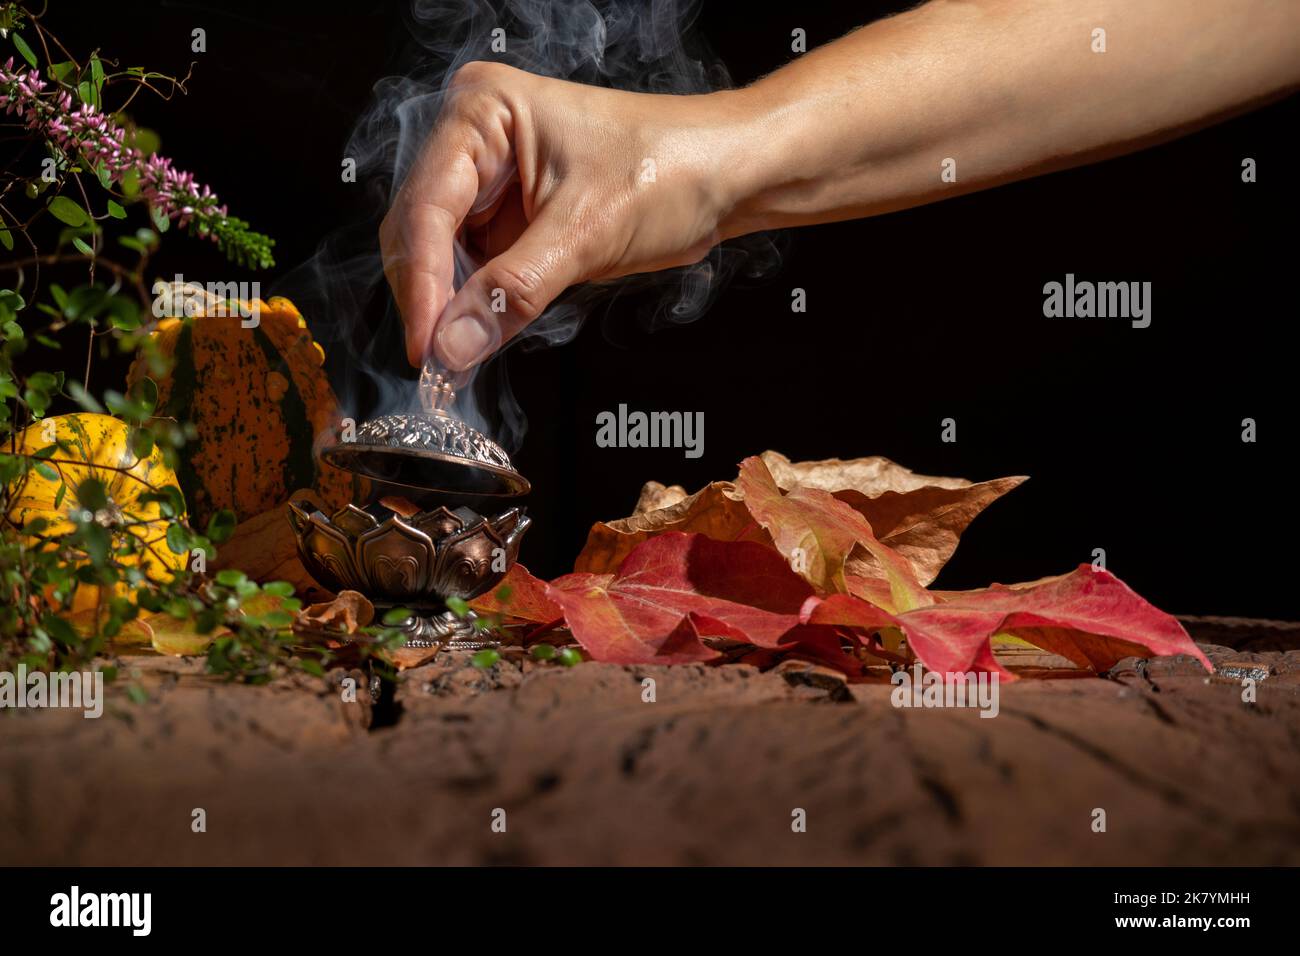 A woman's hand sets fire to an incense stick on a burner. Background for meditation. Stock Photo